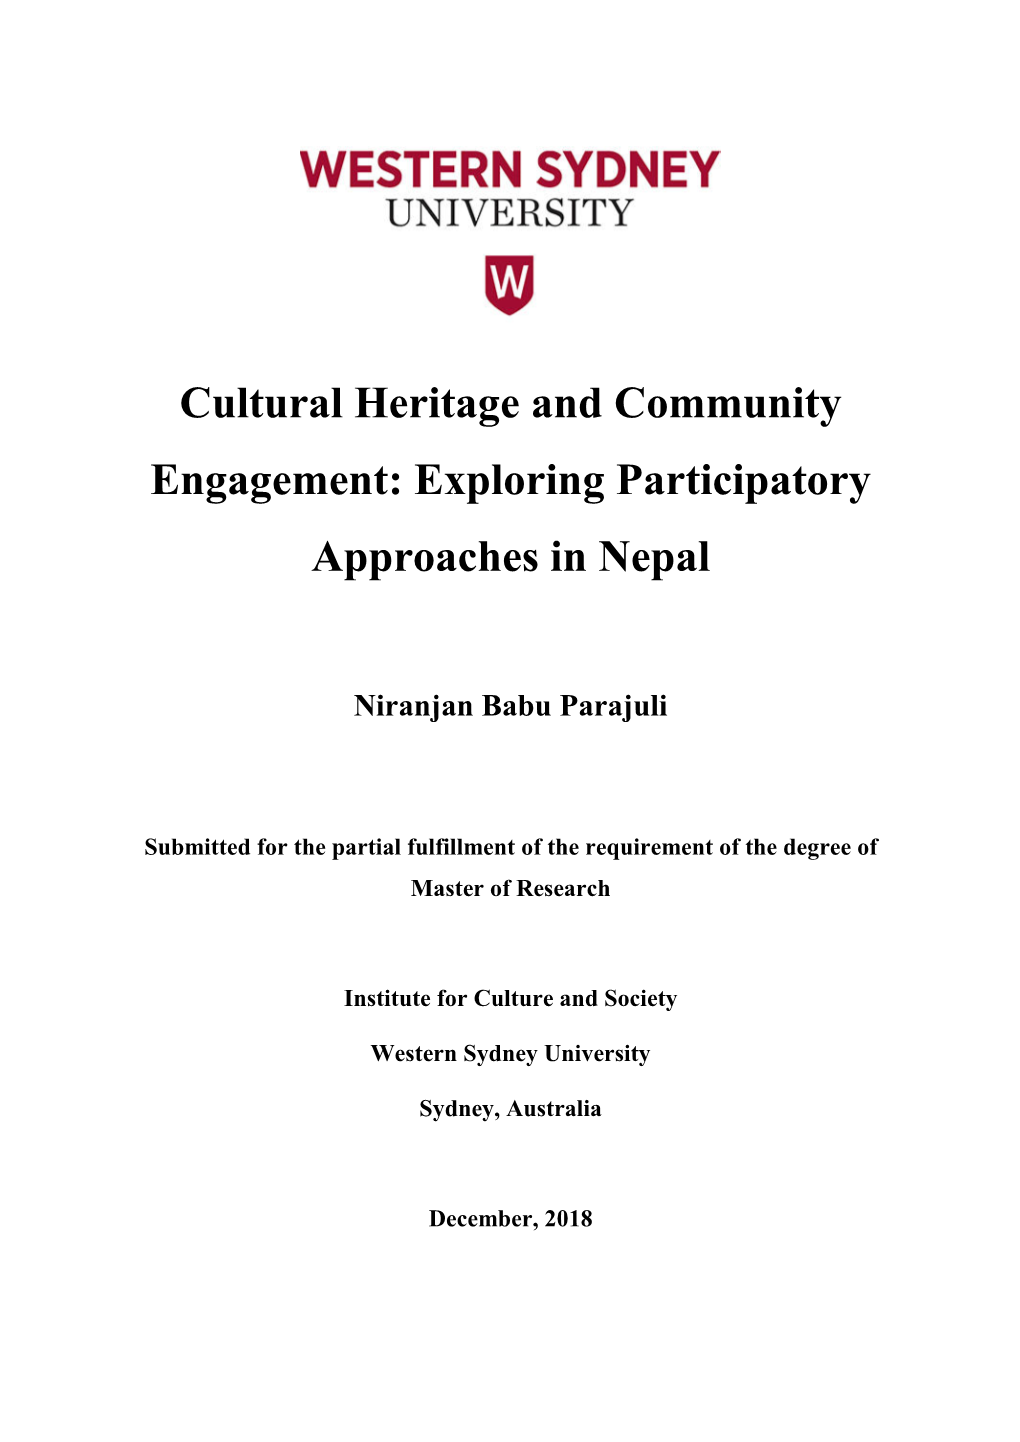 Cultural Heritage and Community Engagement: Exploring Participatory Approaches in Nepal